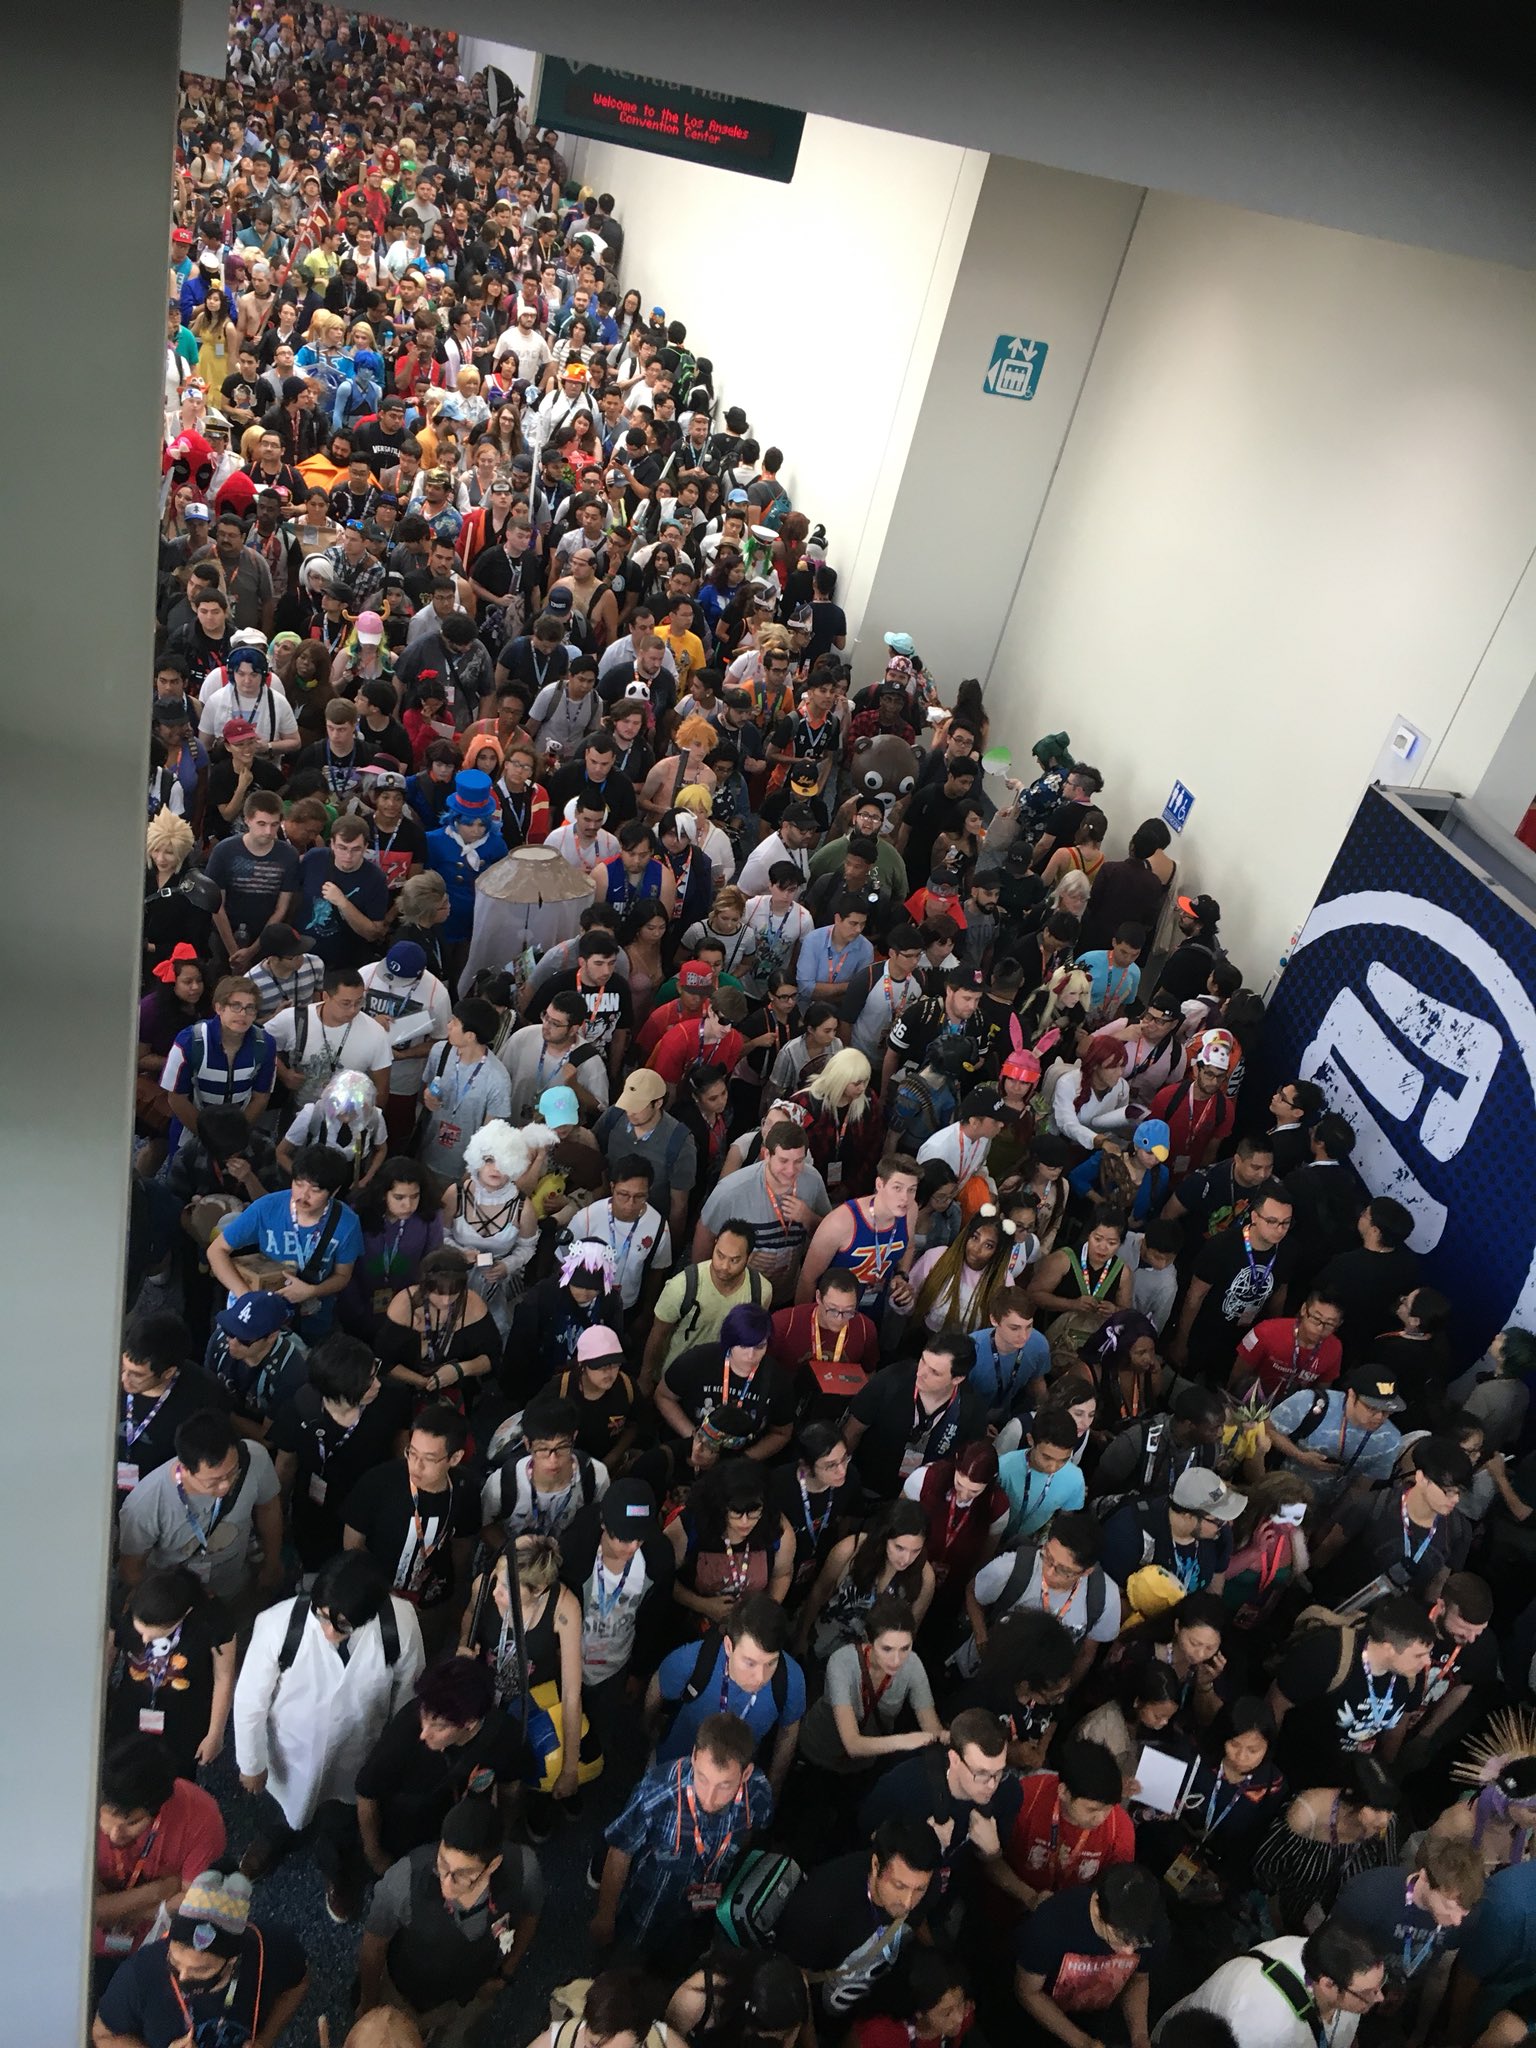 Crowds And Spectacle Walking the Halls at Anime Expo 2018  Anime Herald